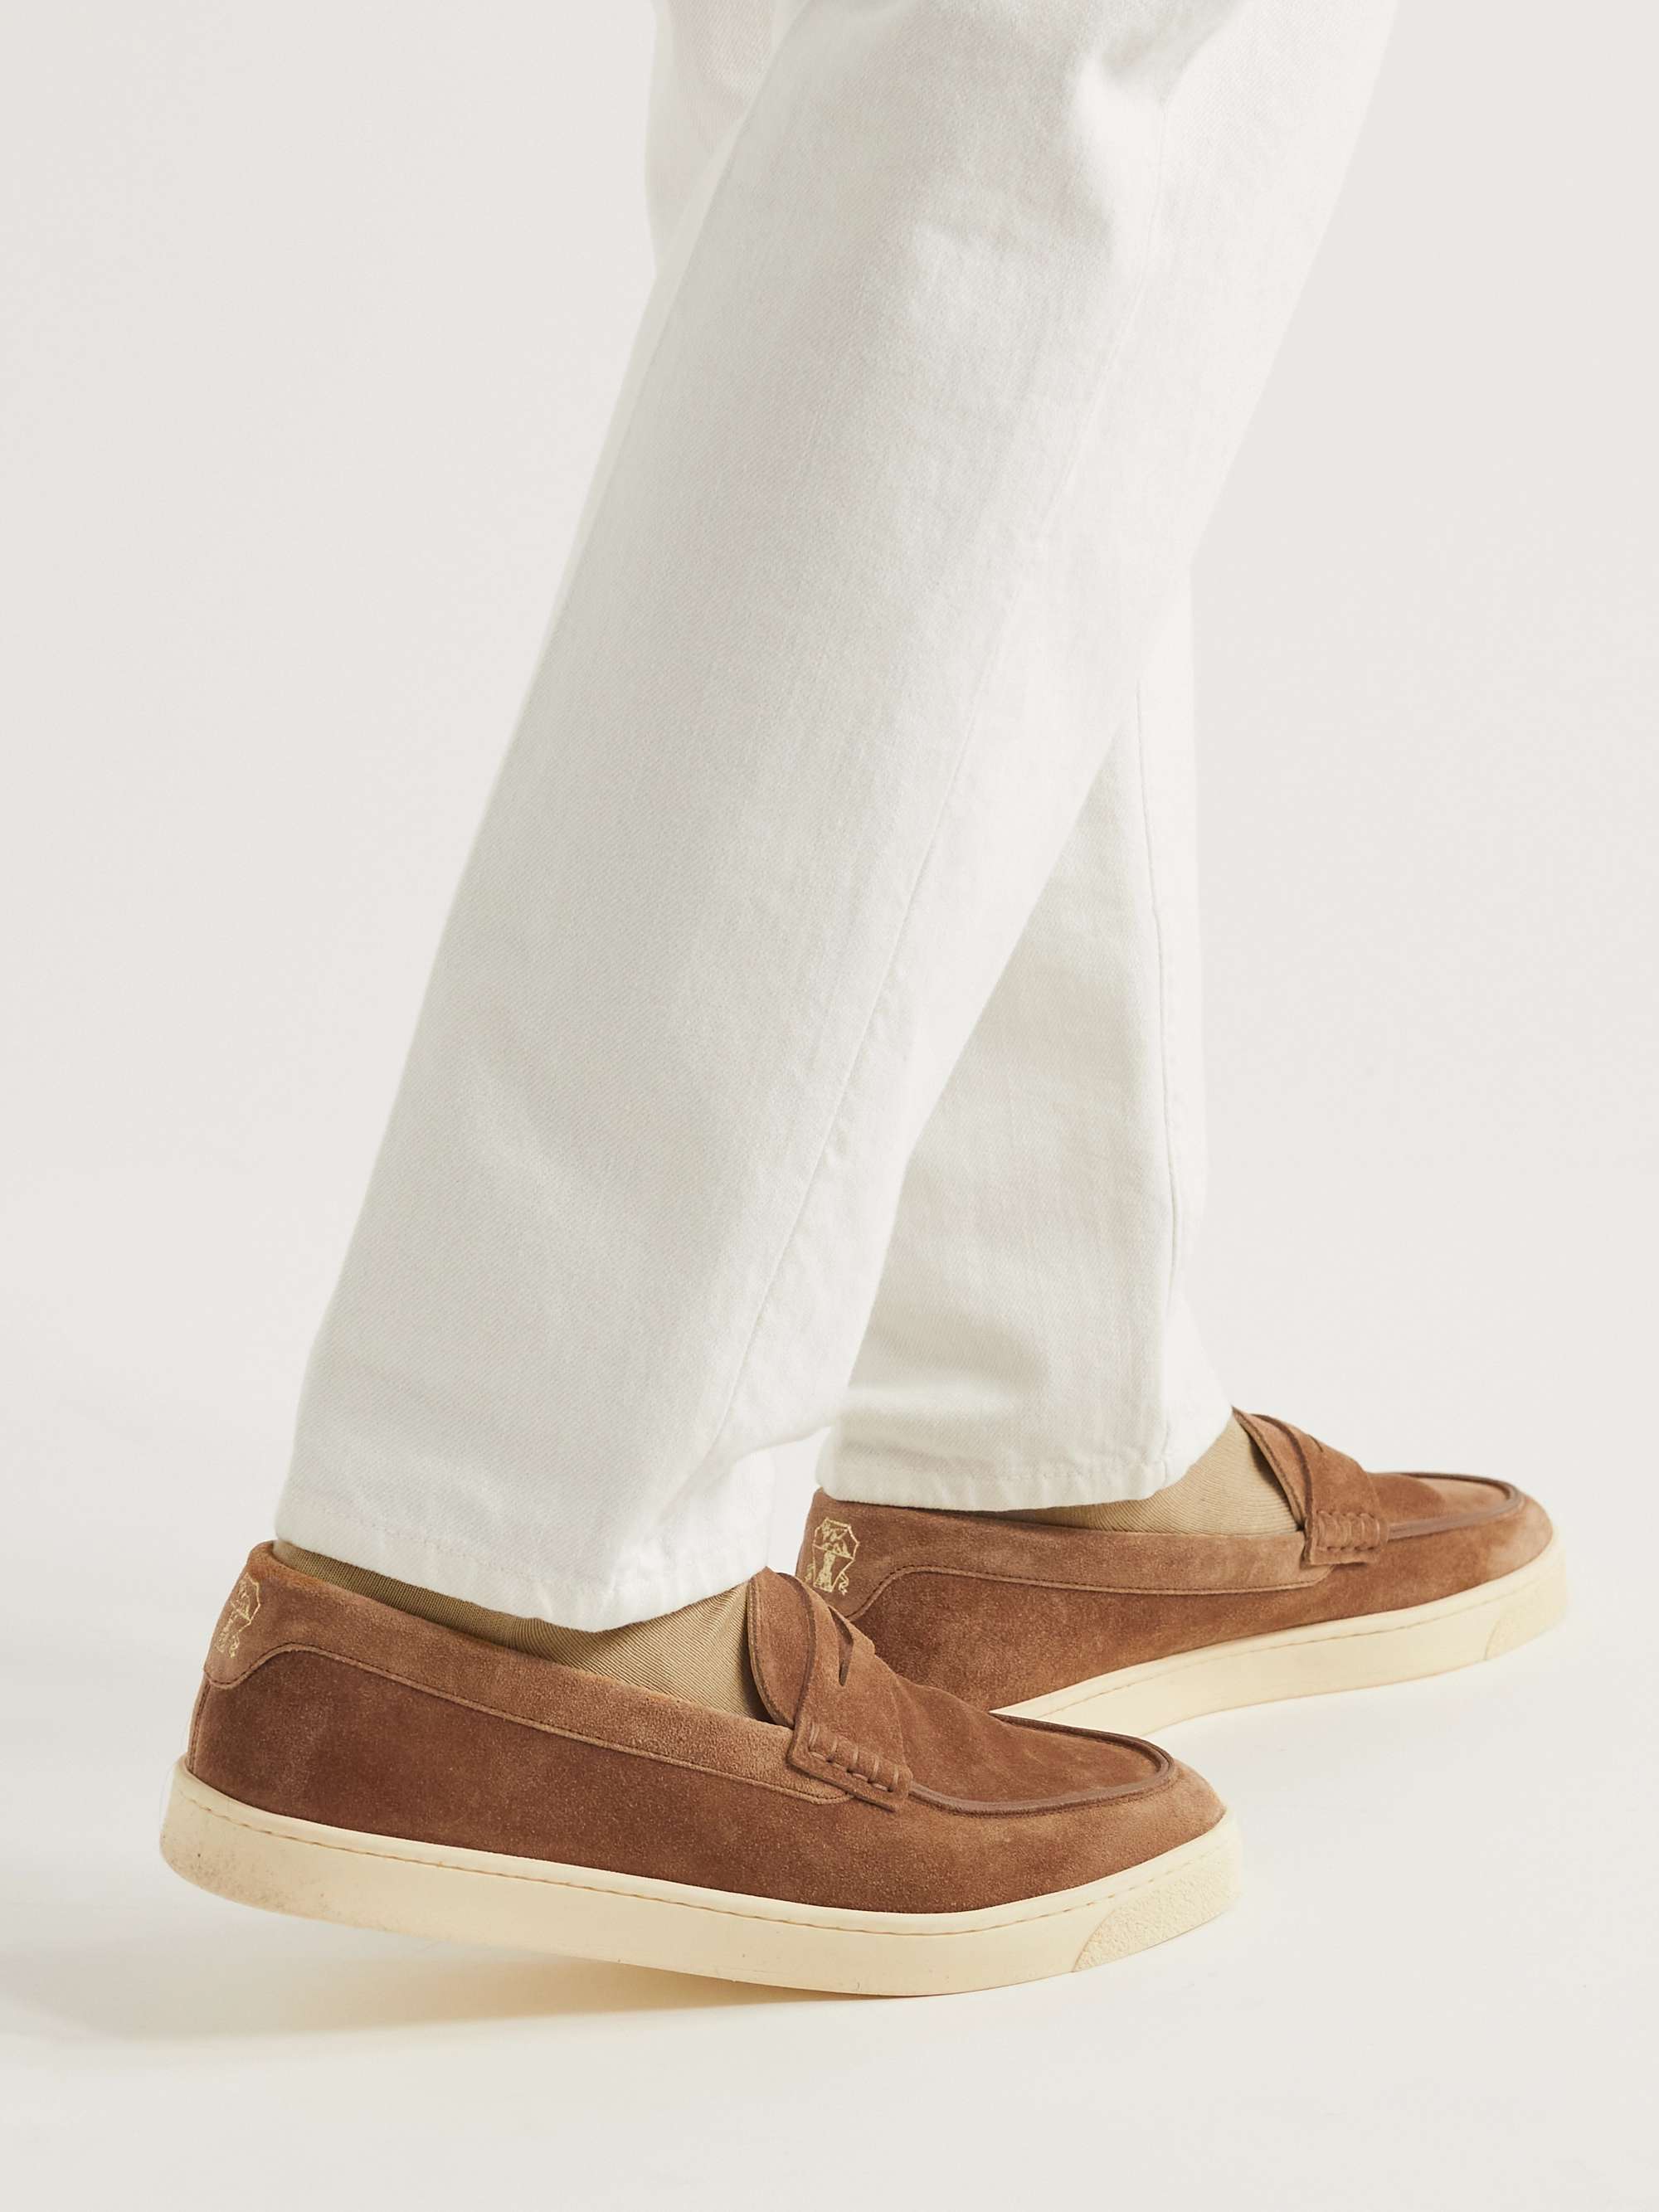 BRUNELLO CUCINELLI Suede Penny Loafers